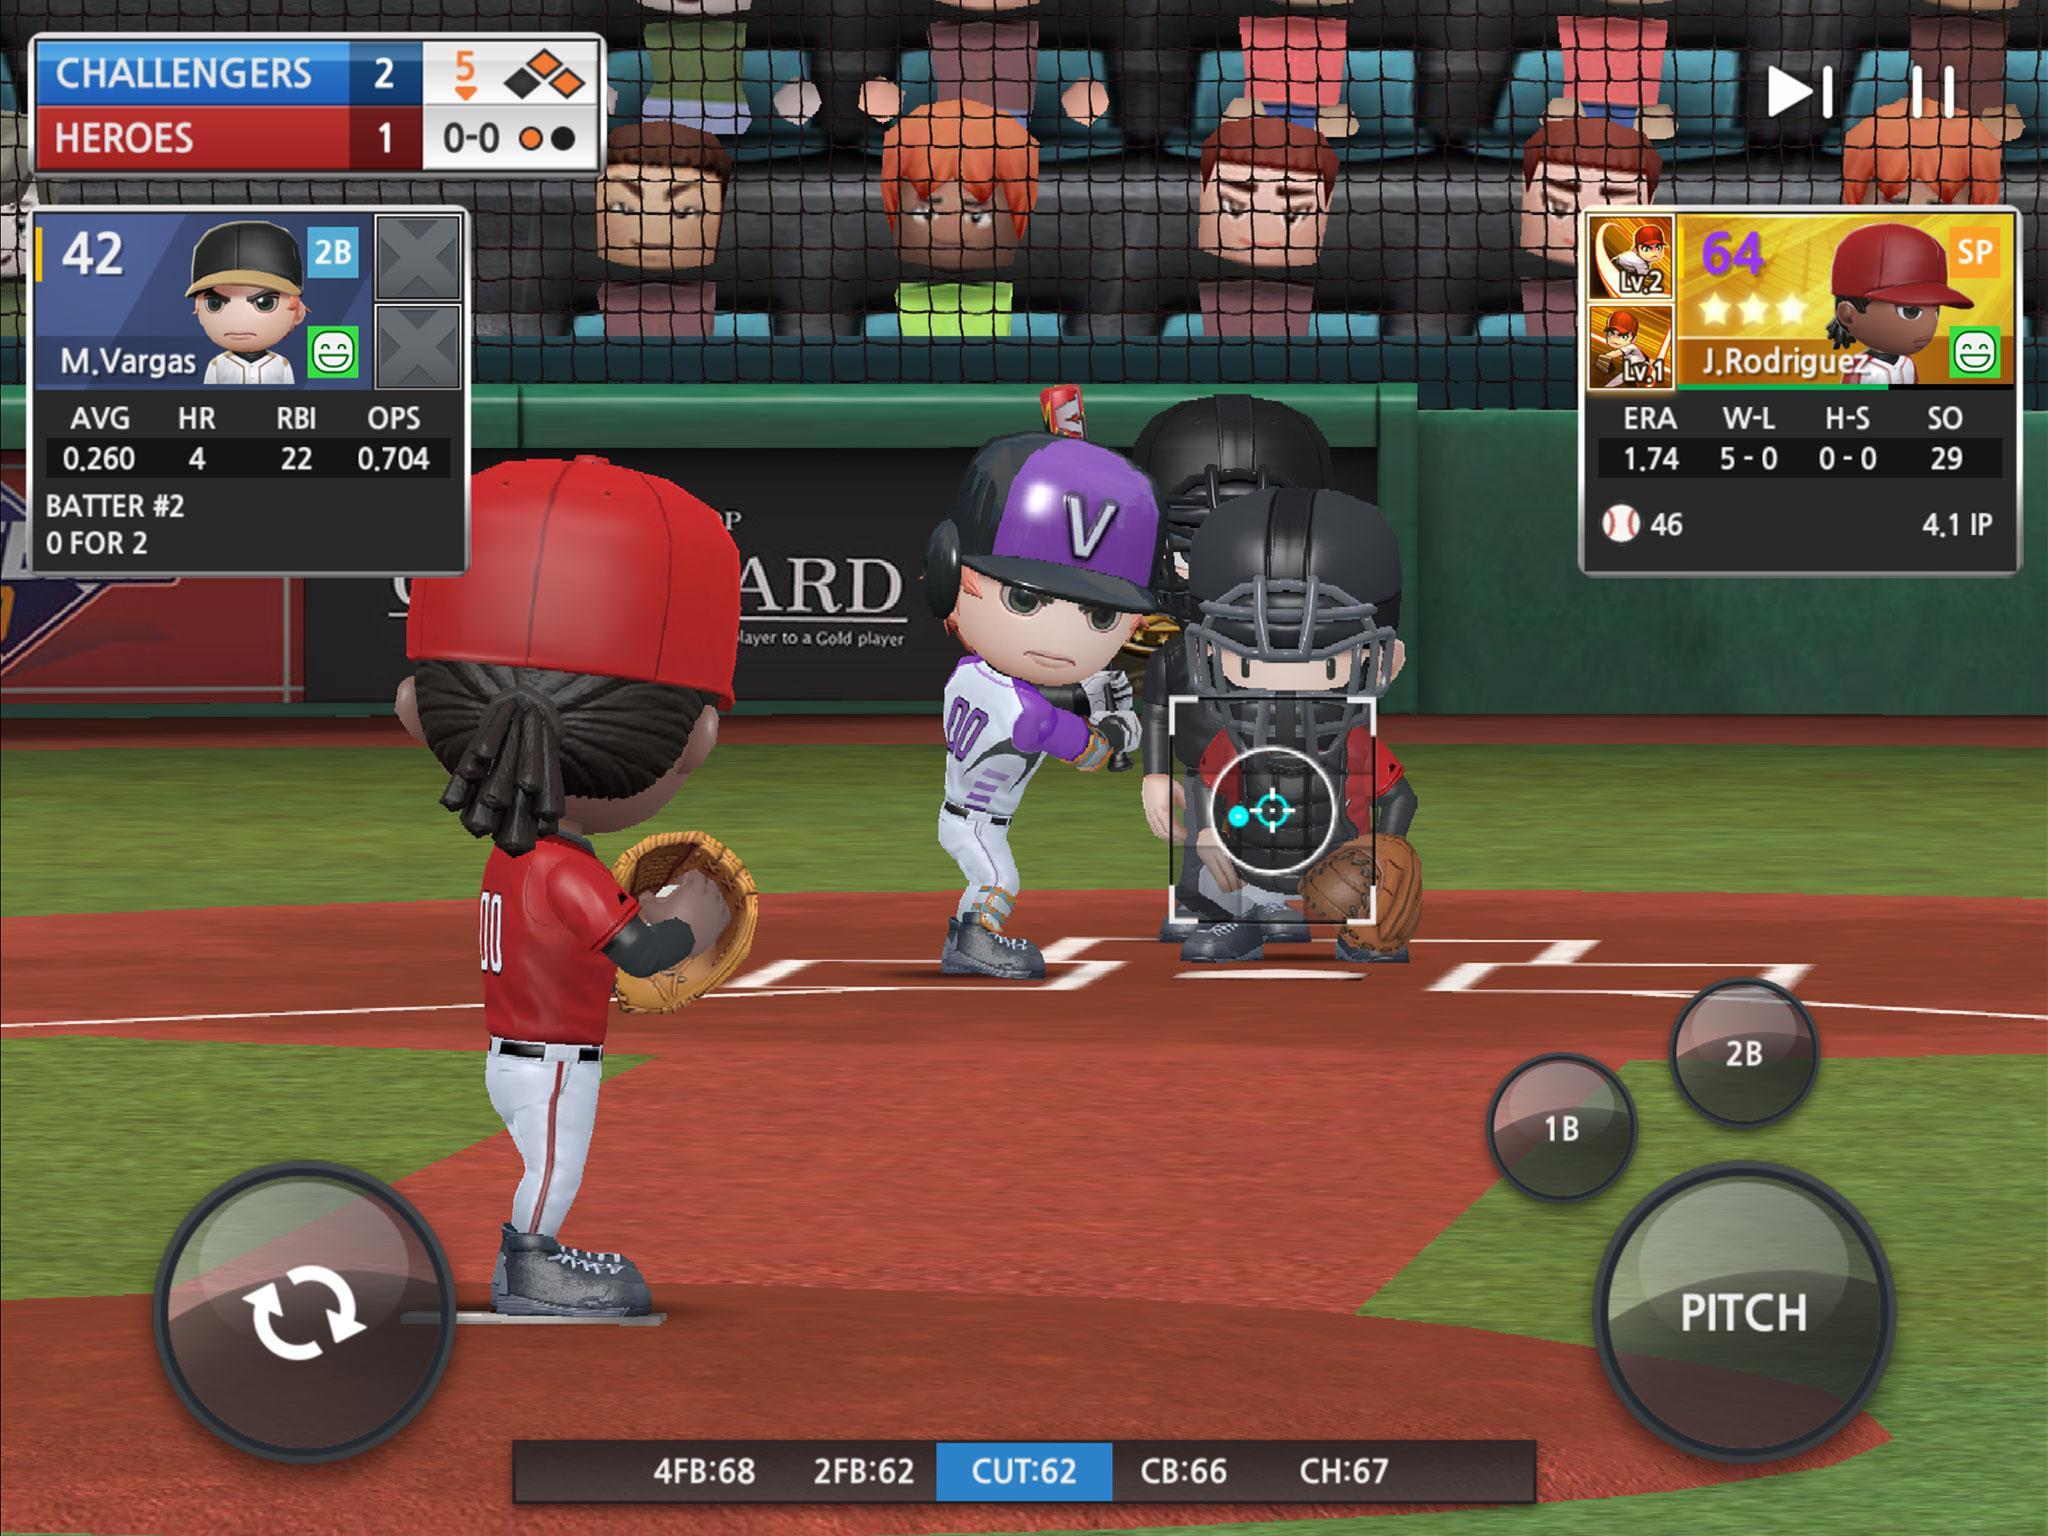 BASEBALL 9 for Android - APK Download